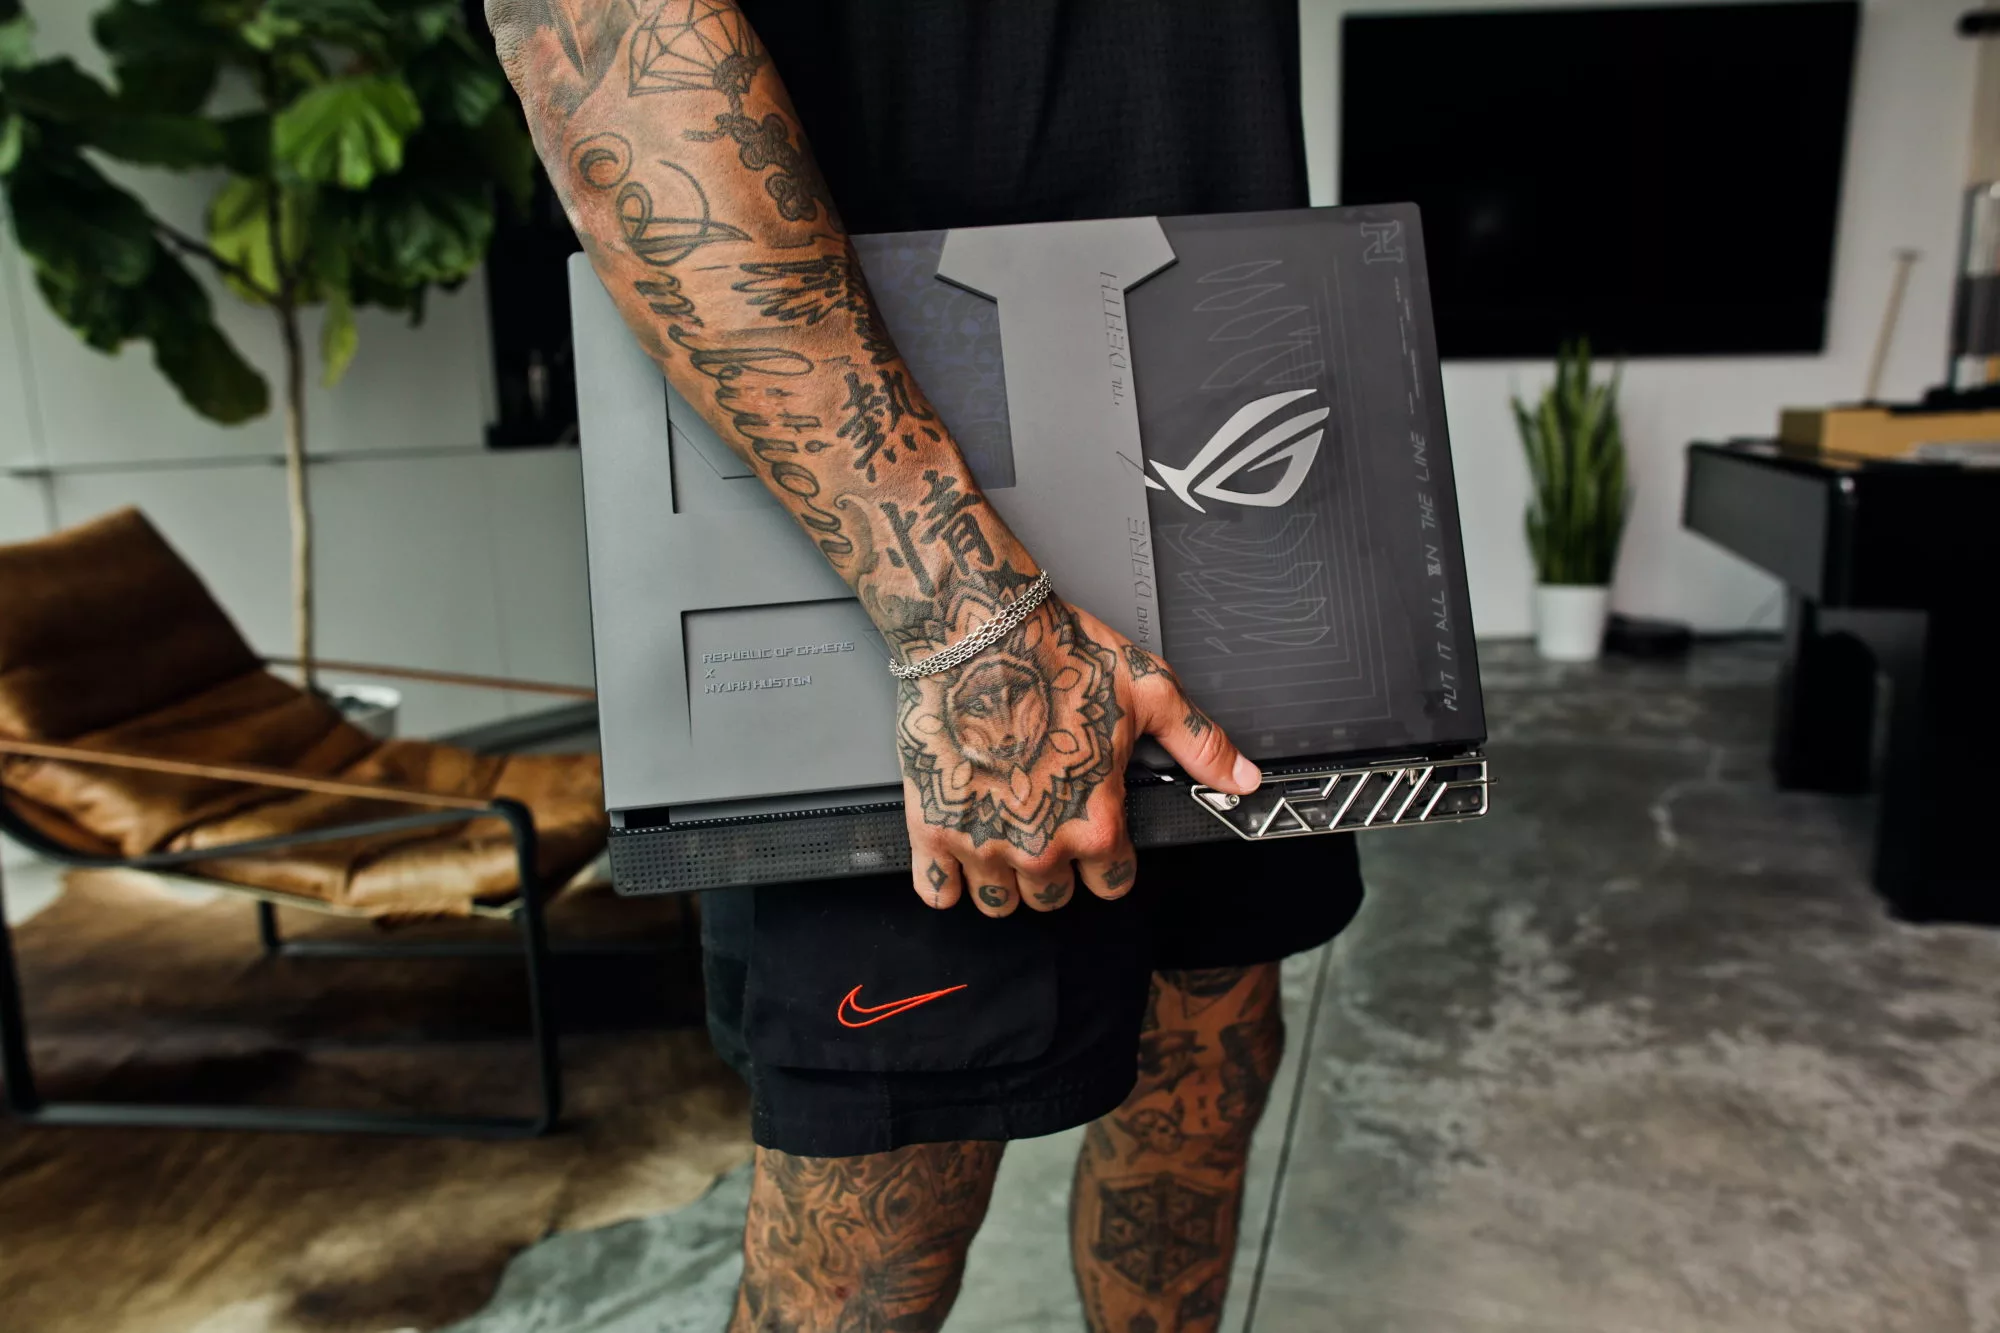 Nyjah Huston holding his laptop, with arm tattoos and the laptop lid visible.